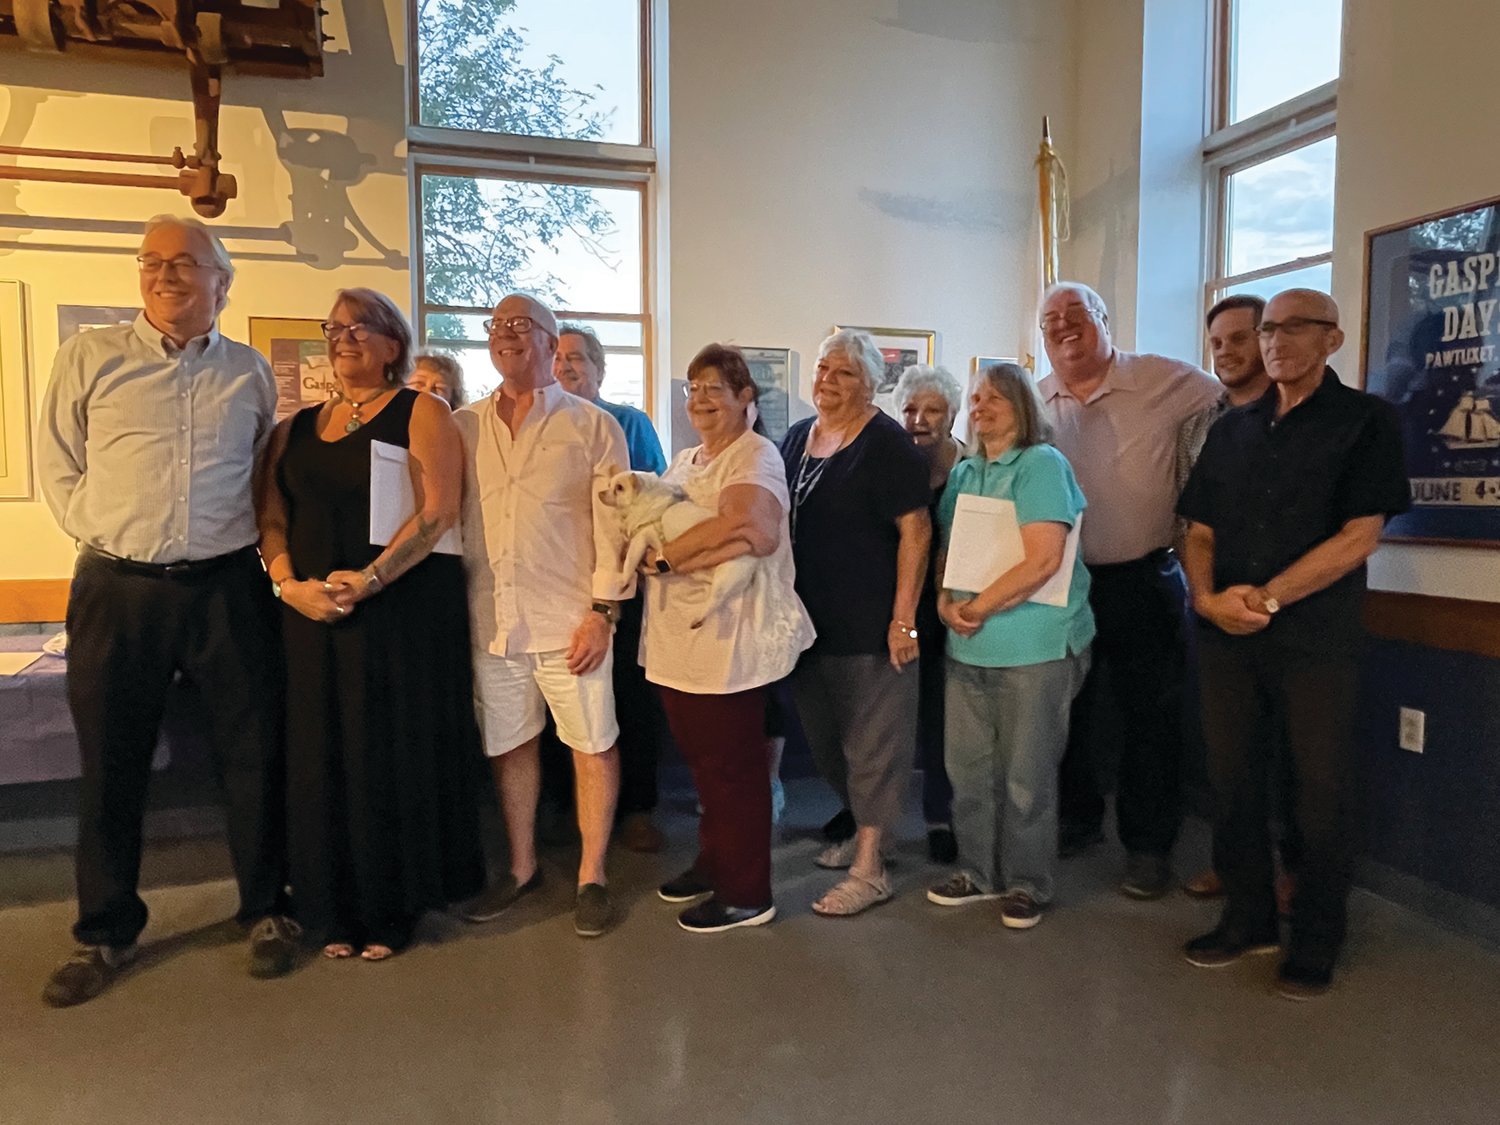 GASPEE TEAM: The newly installed officers of the Gaspee Days Committee gather after the Sept. 2 ceremony at the Aspray Boat House.